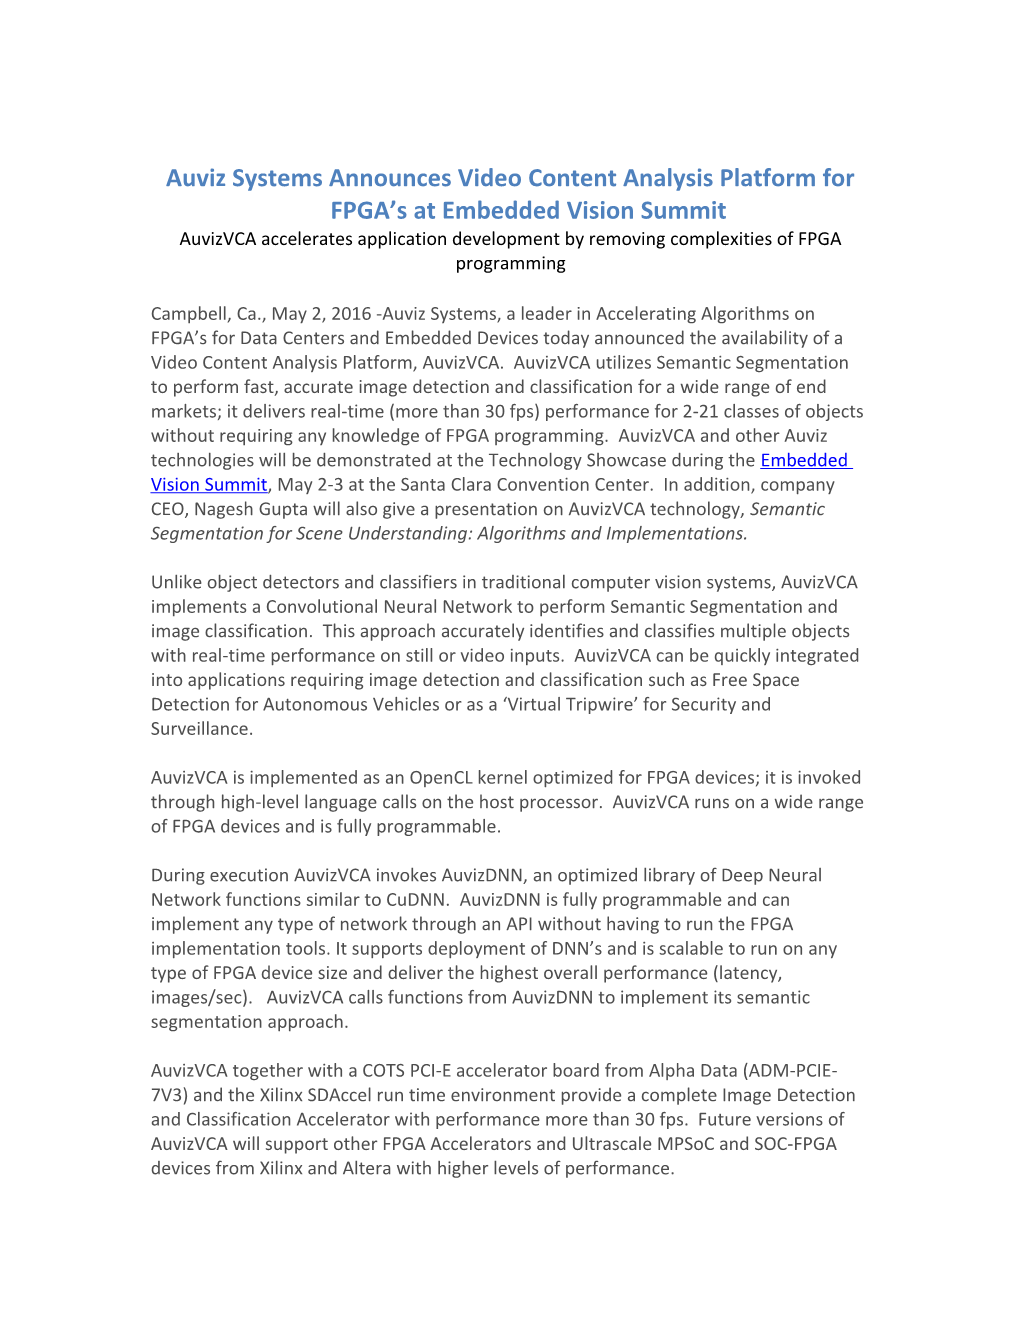 Auviz Systems Announces Video Content Analysis Platform for FPGA S at Embedded Vision Summit